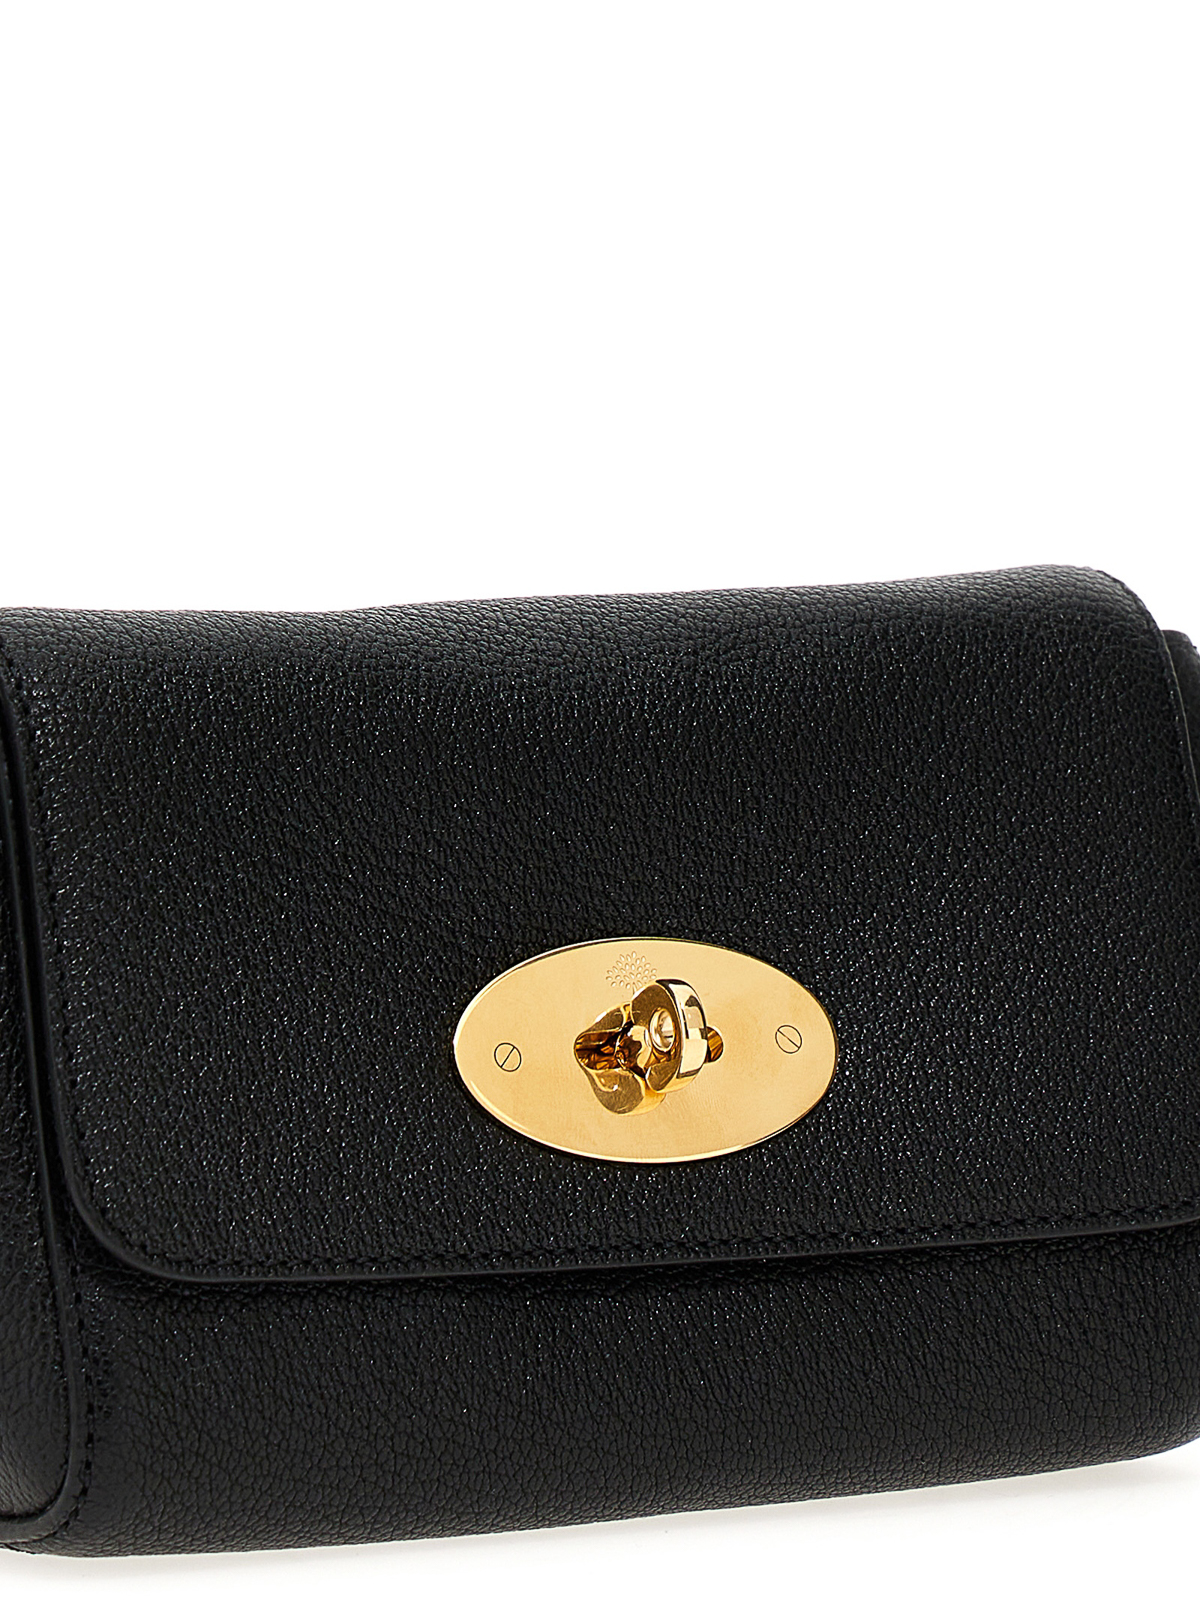 Shop Mulberry Mini Lilly Crossbody Bag In Black